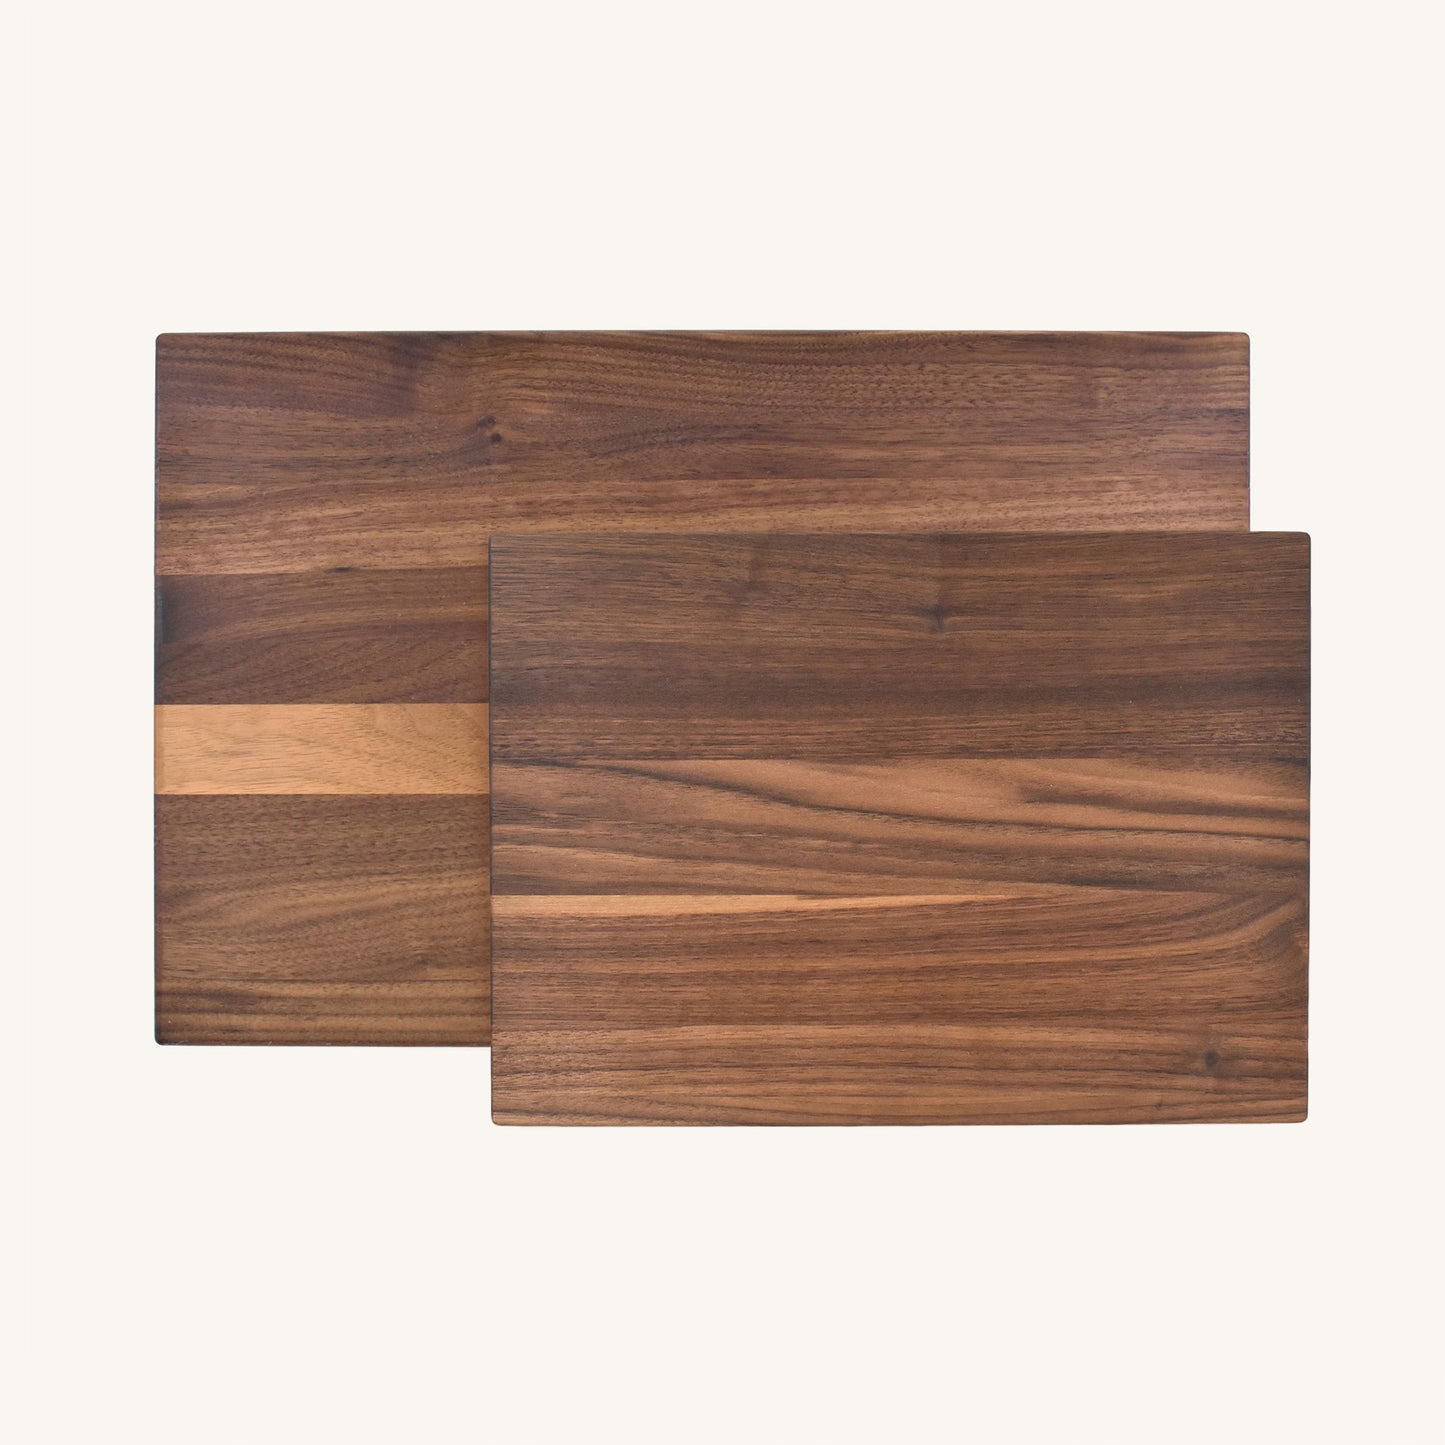 Bundle of Medium and Large Wood Cutting Board with Rounded Corner and Edges